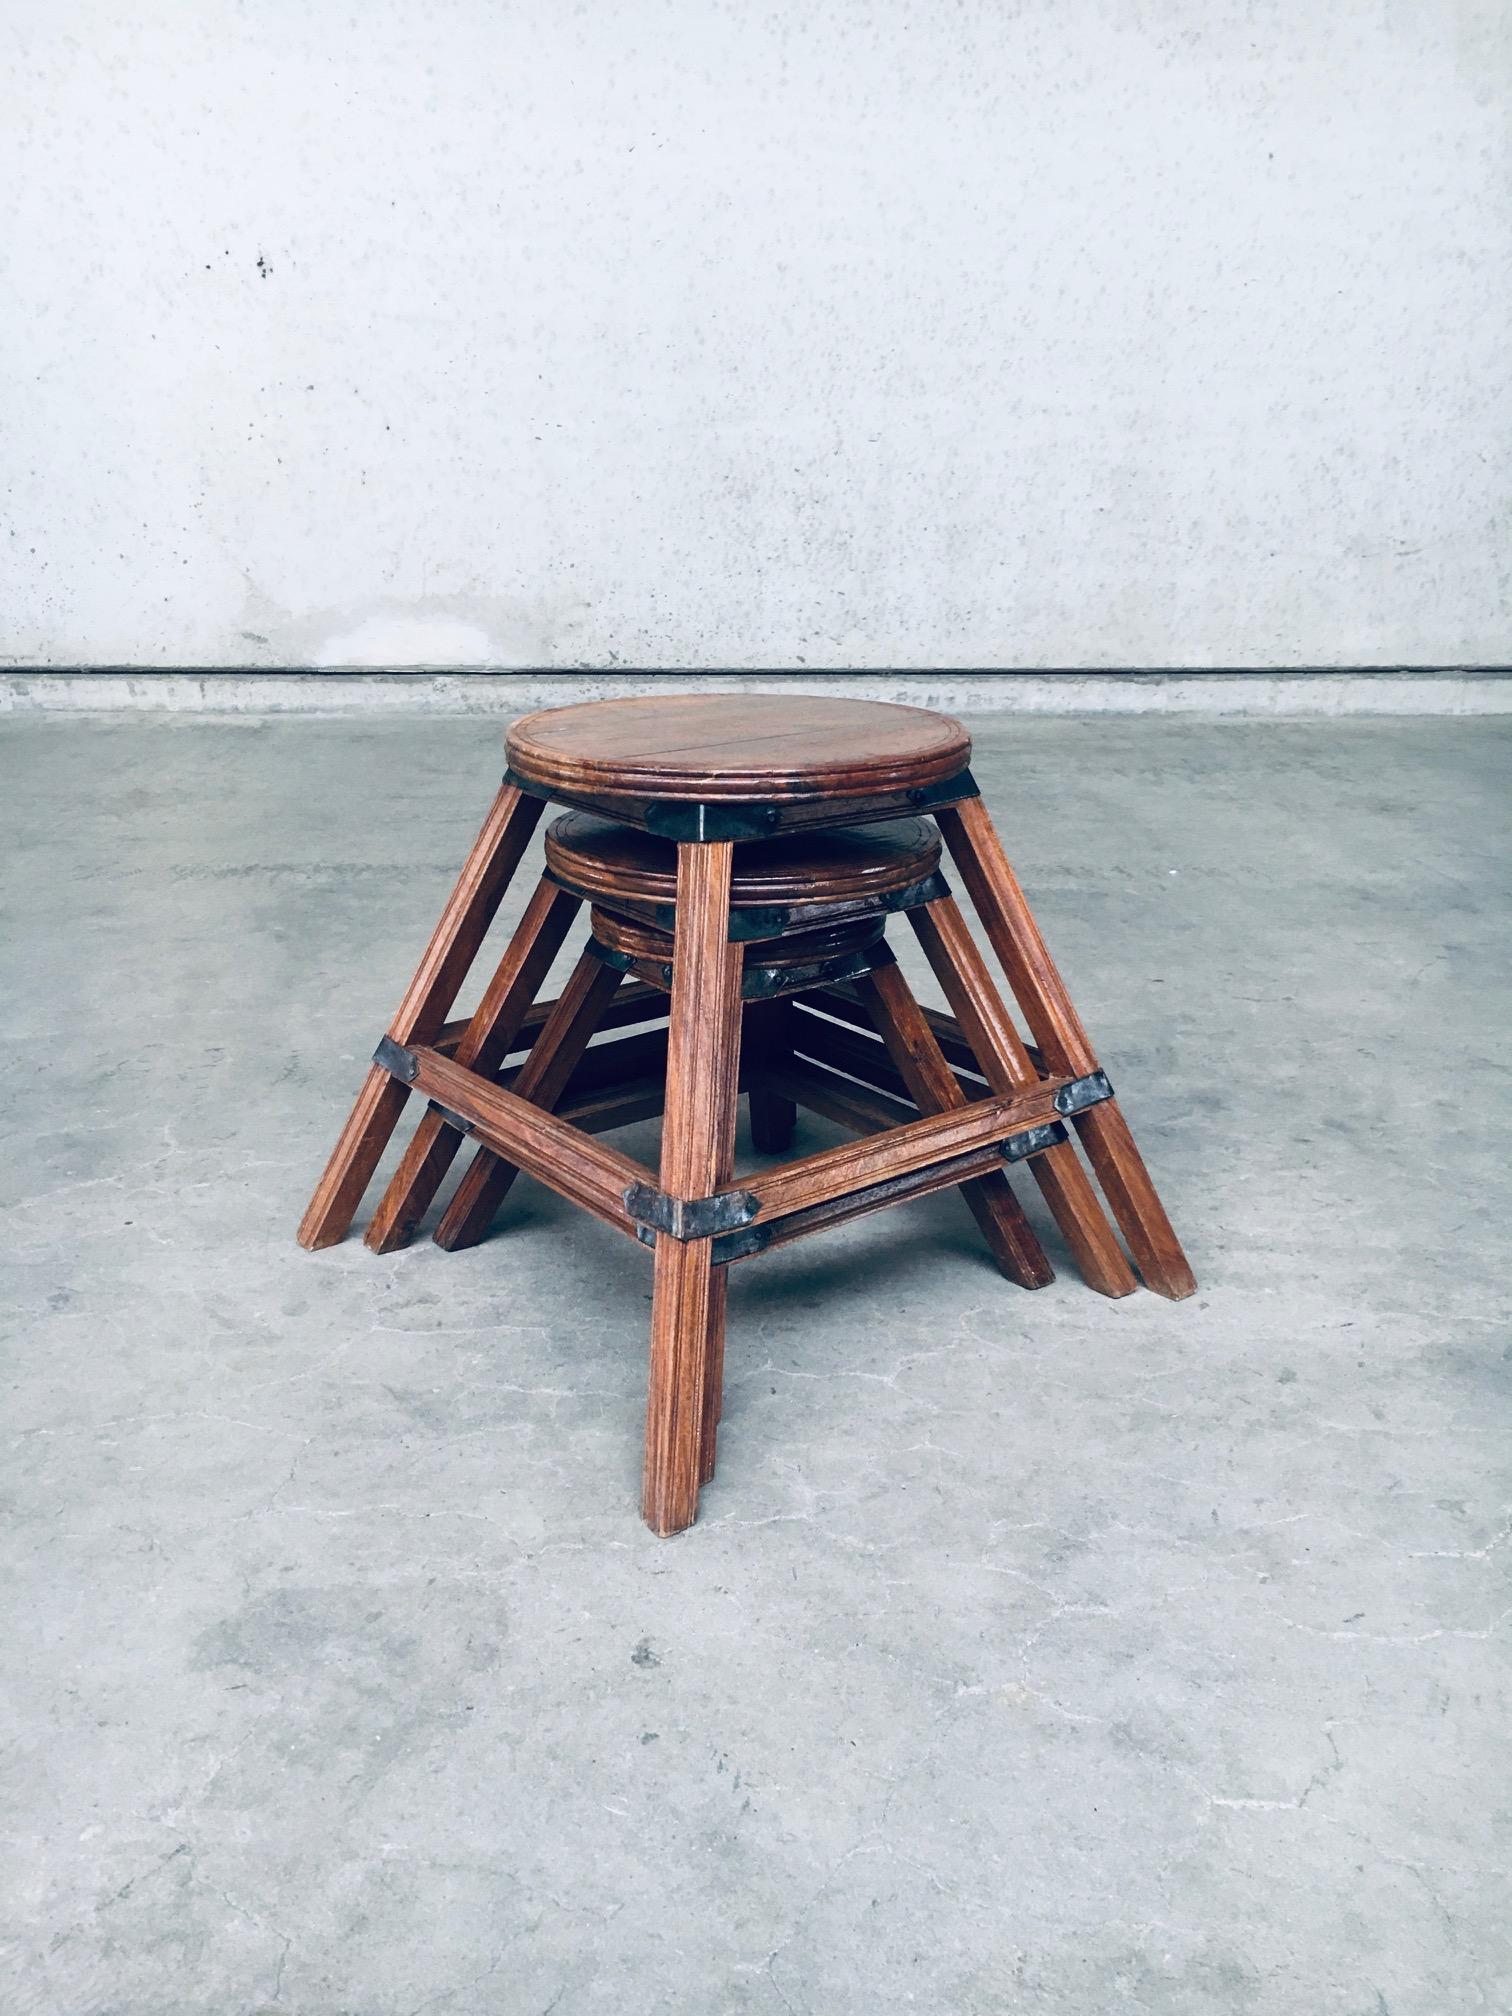 Vintage handcrafted Wabi Sabi style design nesting table set of 3. Made in France, 1940's / 50's. Handmade nesting side or plant table set of 3. Oak wood constructed tables with metal reinforcing brackets and plates. The three stools all fit nicely